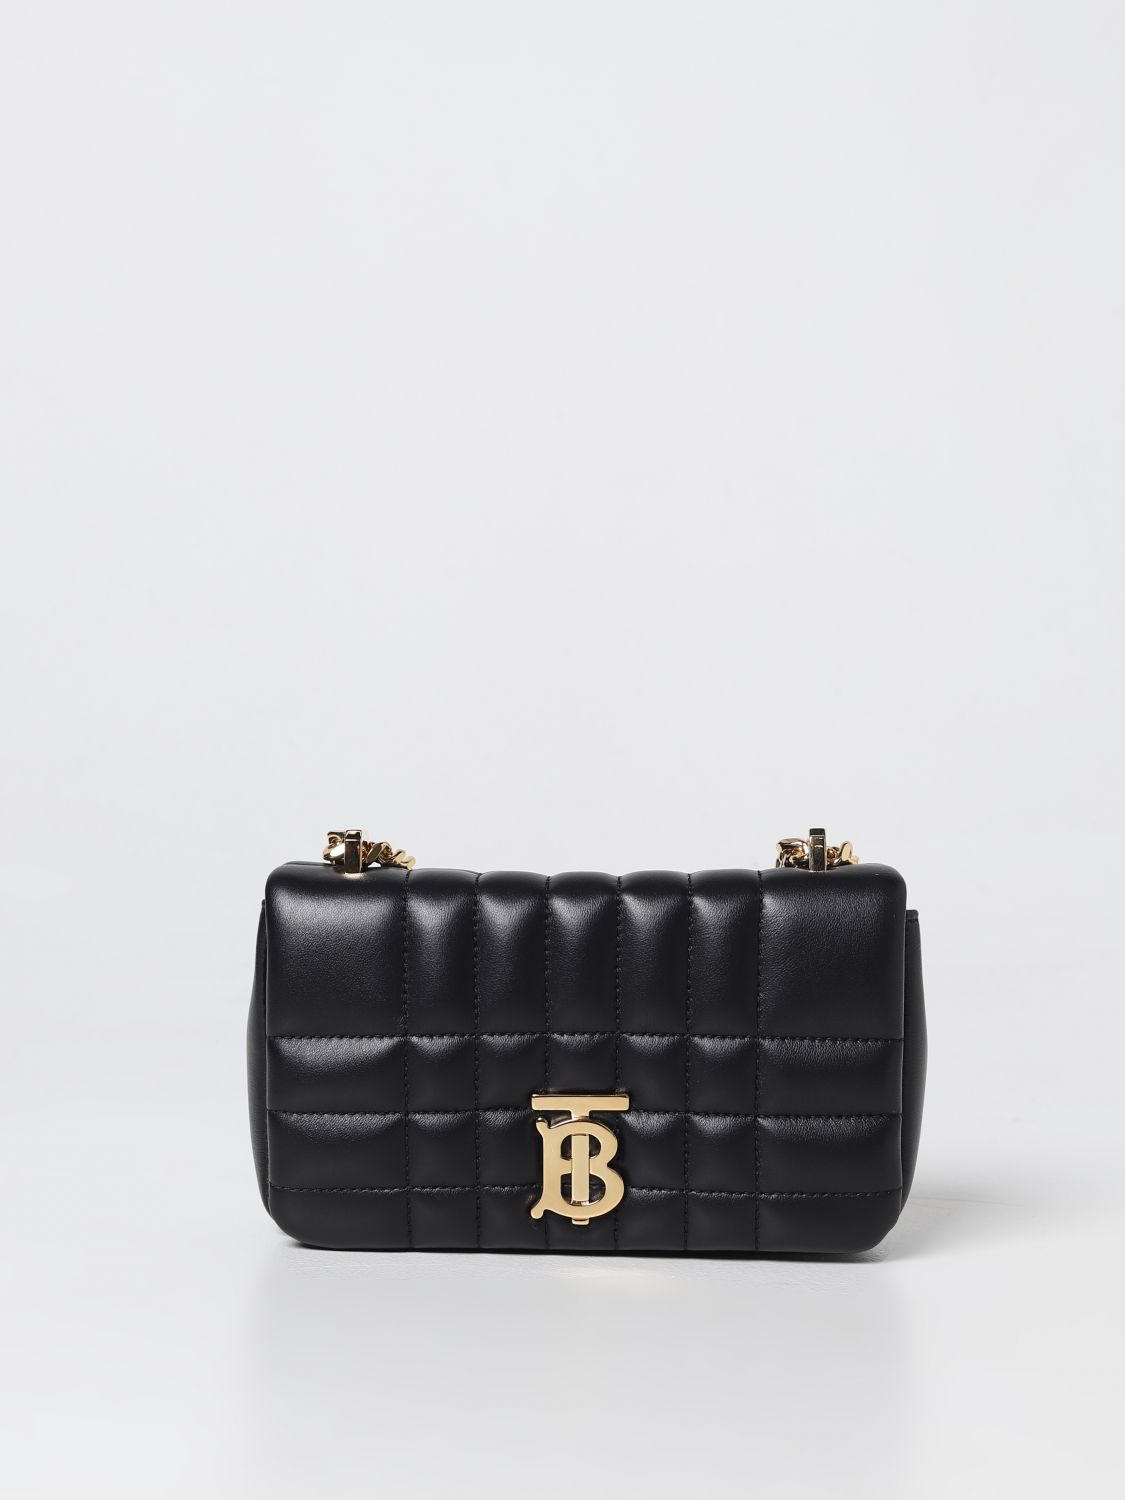 BURBERRY: Lola bag in quilted nappa leather - Black  Burberry shoulder bag  8059492 online at